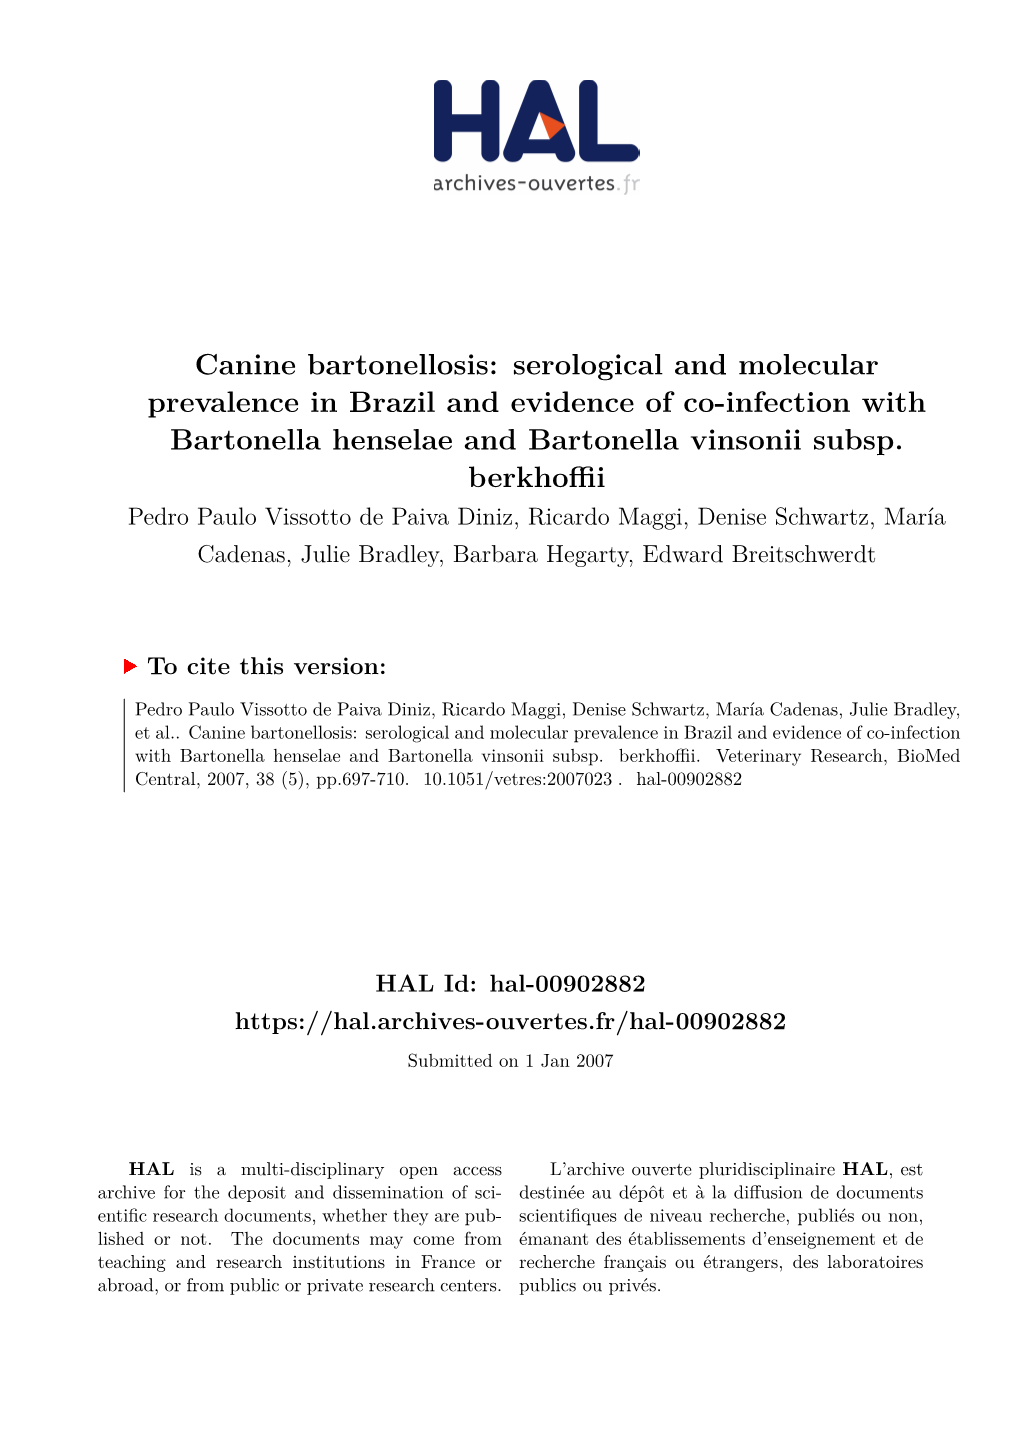 Canine Bartonellosis: Serological and Molecular Prevalence in Brazil and Evidence of Co-Infection with Bartonella Henselae and Bartonella Vinsonii Subsp